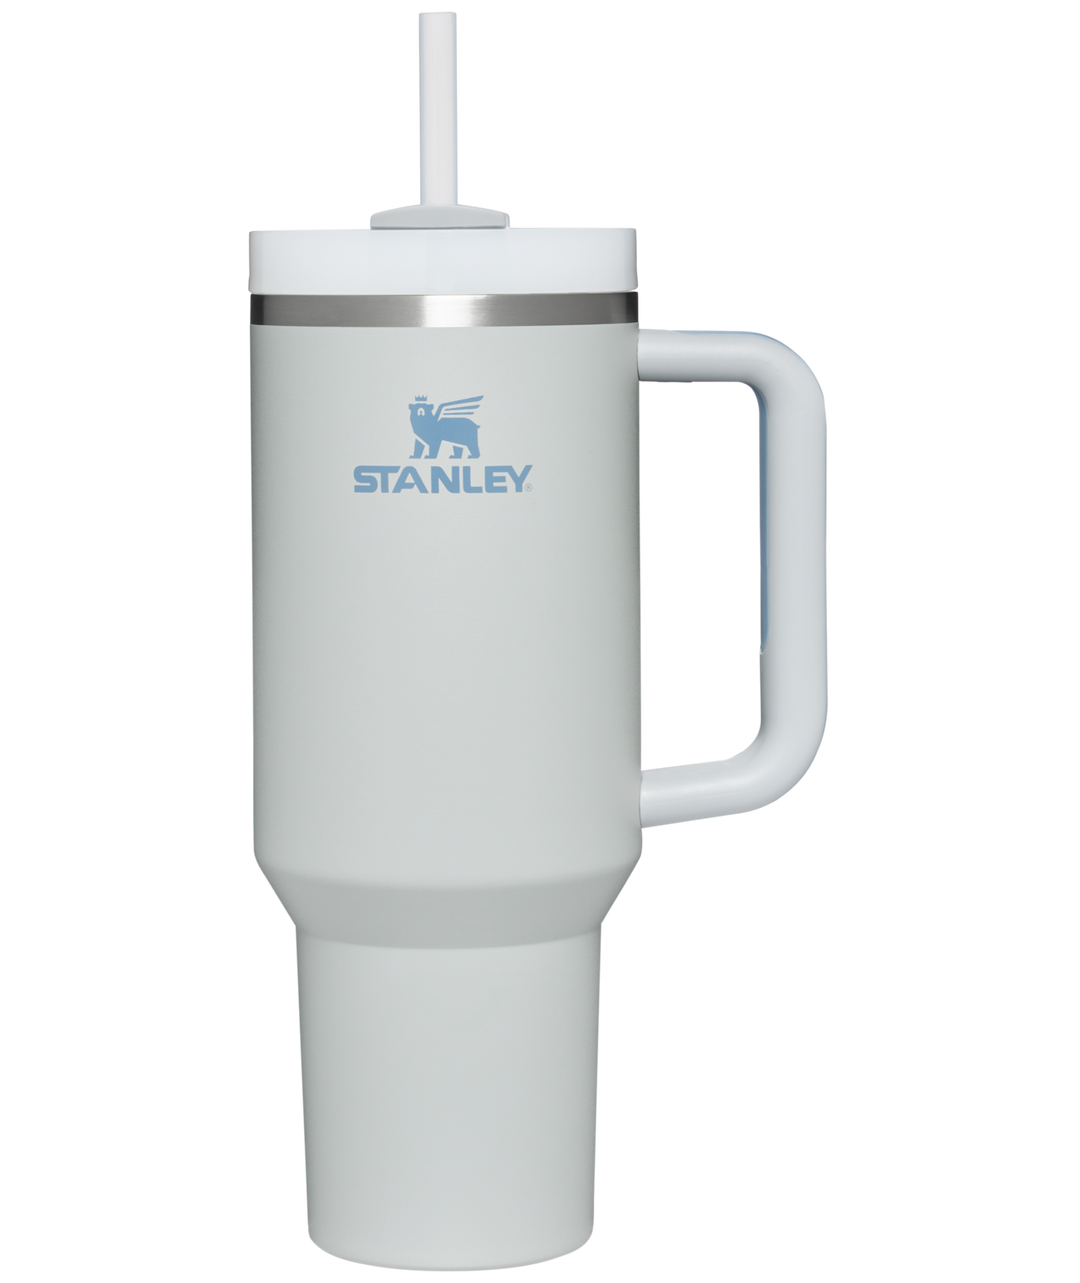 Just Dropped Holiday Accessories for Your Stanley Tumbler – SheKnows